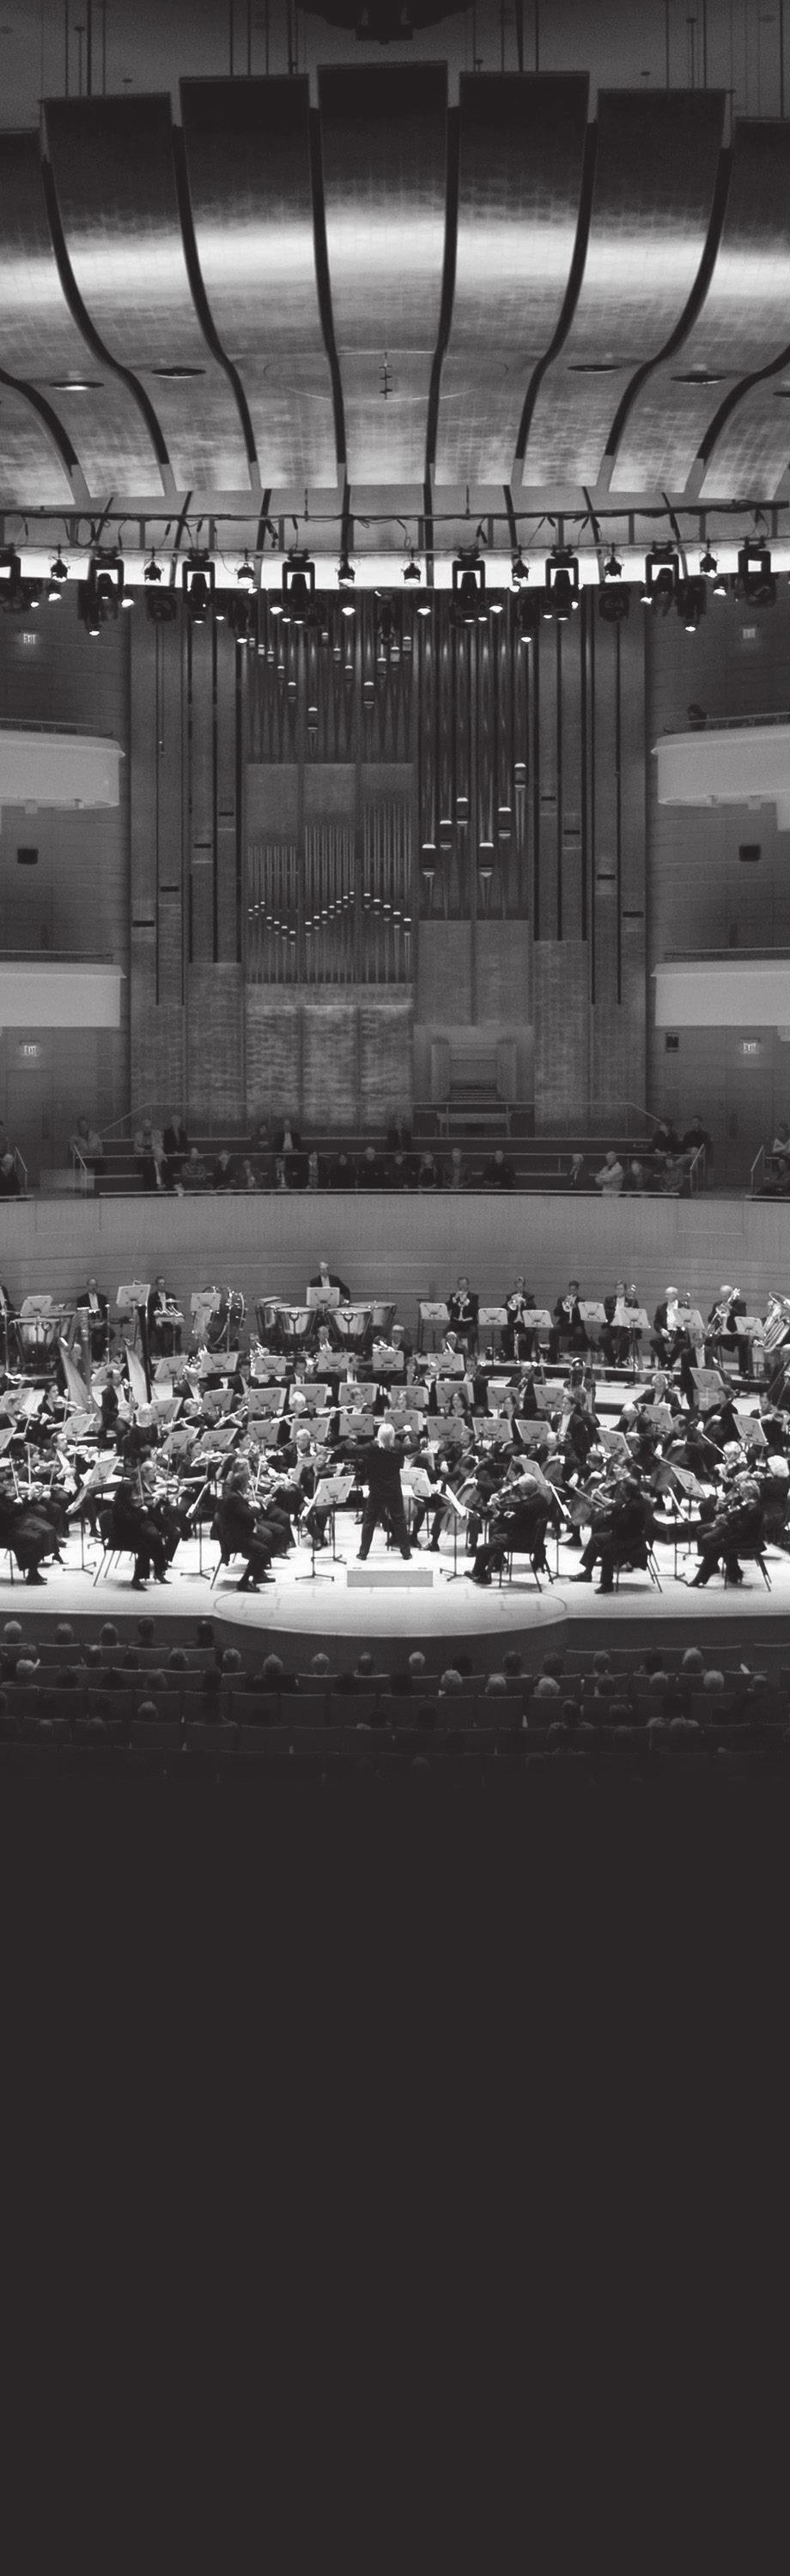 ABOUT pacific symphony Pacific Symphony, led by Music Director Carl St.Clair for the last 28 years, has been the resident orchestra of the Renée and Henry Segerstrom Concert Hall for over a decade.